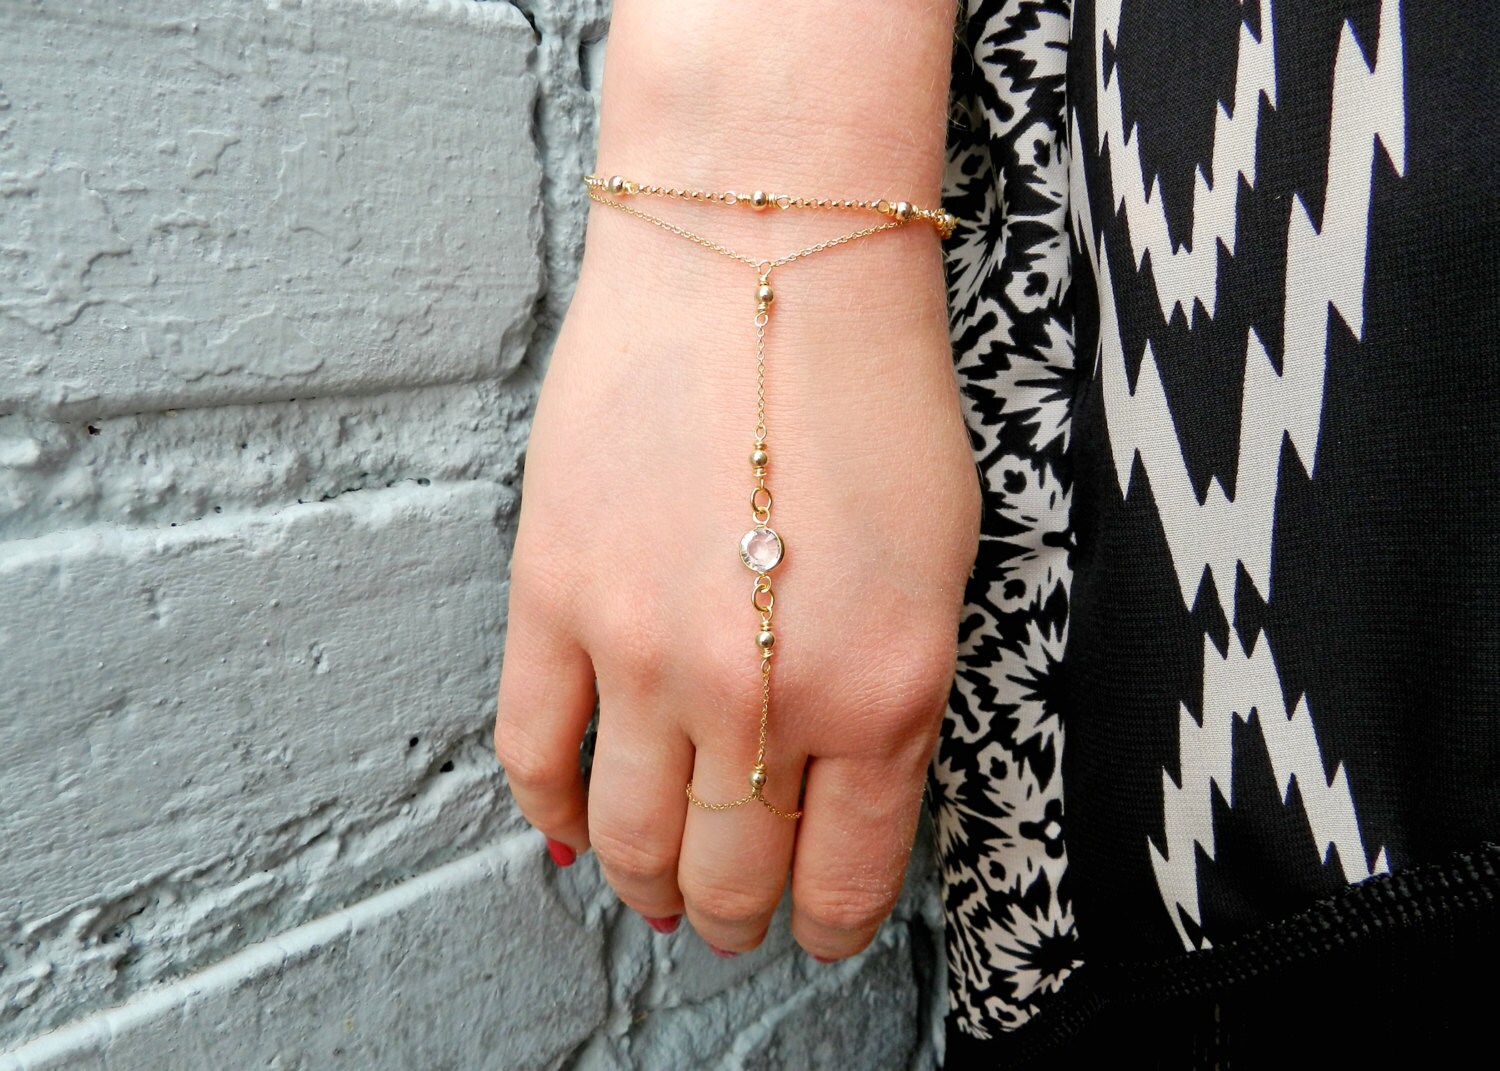 925 Sterling Silver Hand Chain, Rose Gold Filled Finger Bracelet, Chain, Hand  Chain Bracelet and Ring, Hand Bracelet, Beaded Hand Bracelet - Etsy | Hand  chain bracelet, Finger bracelets, Hand chain jewelry